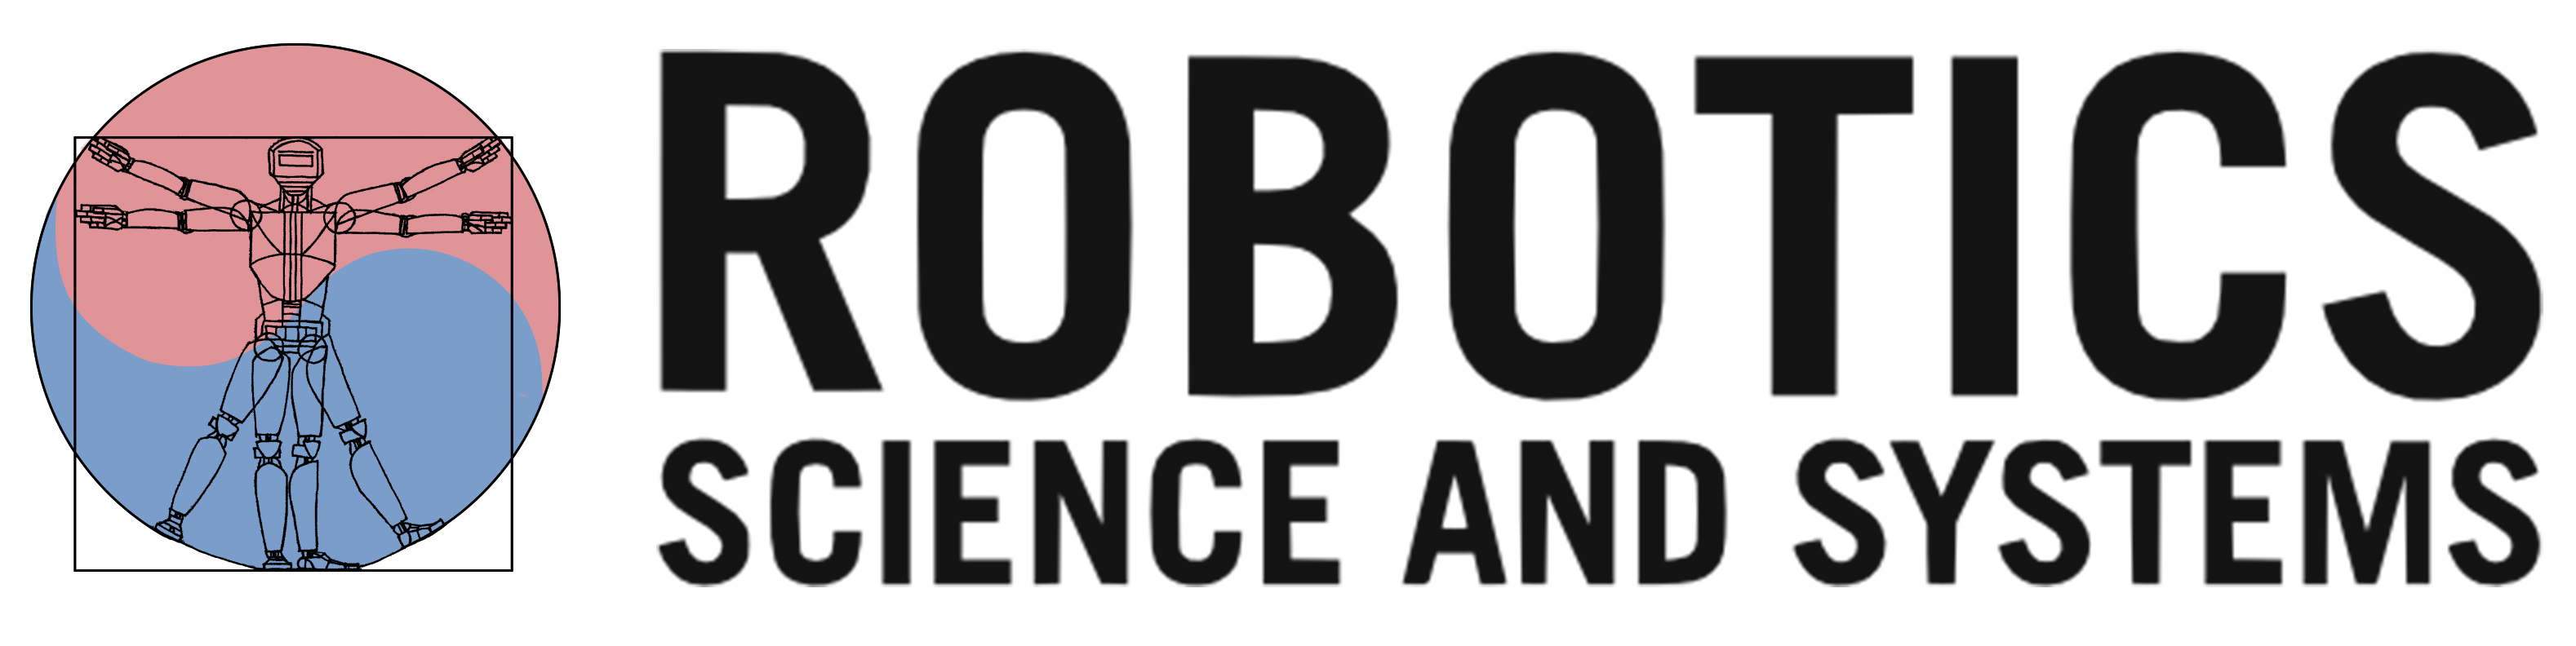 Robotics: Science and Systems 2023 Conference Logo